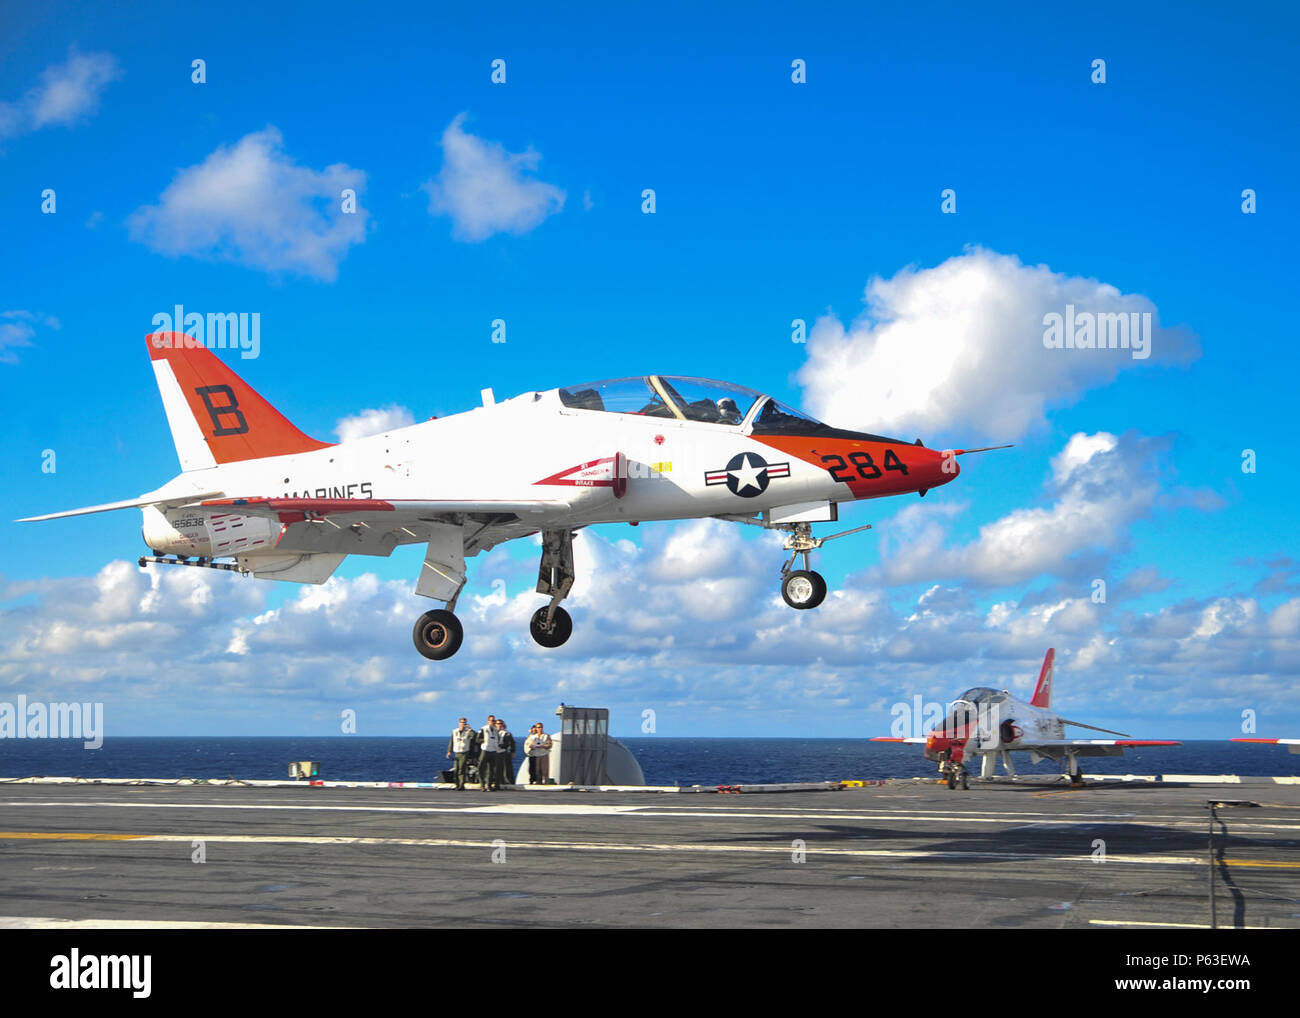 160423-YB023-N-104 ATLANTIC OCEAN (April 23, 2016) A T-45C Goshawk from Training Air Wing  2, prepares to perform a touch-and-go landing on the flight deck of the aircraft carrier USS George Washington (CVN 73). Washington, homeported in Norfolk, is underway conducting carrier qualifications in the Atlantic Ocean. (U.S. Navy photo by Mass Communication Specialist Seaman Clemente A. Lynch/Released) Stock Photo